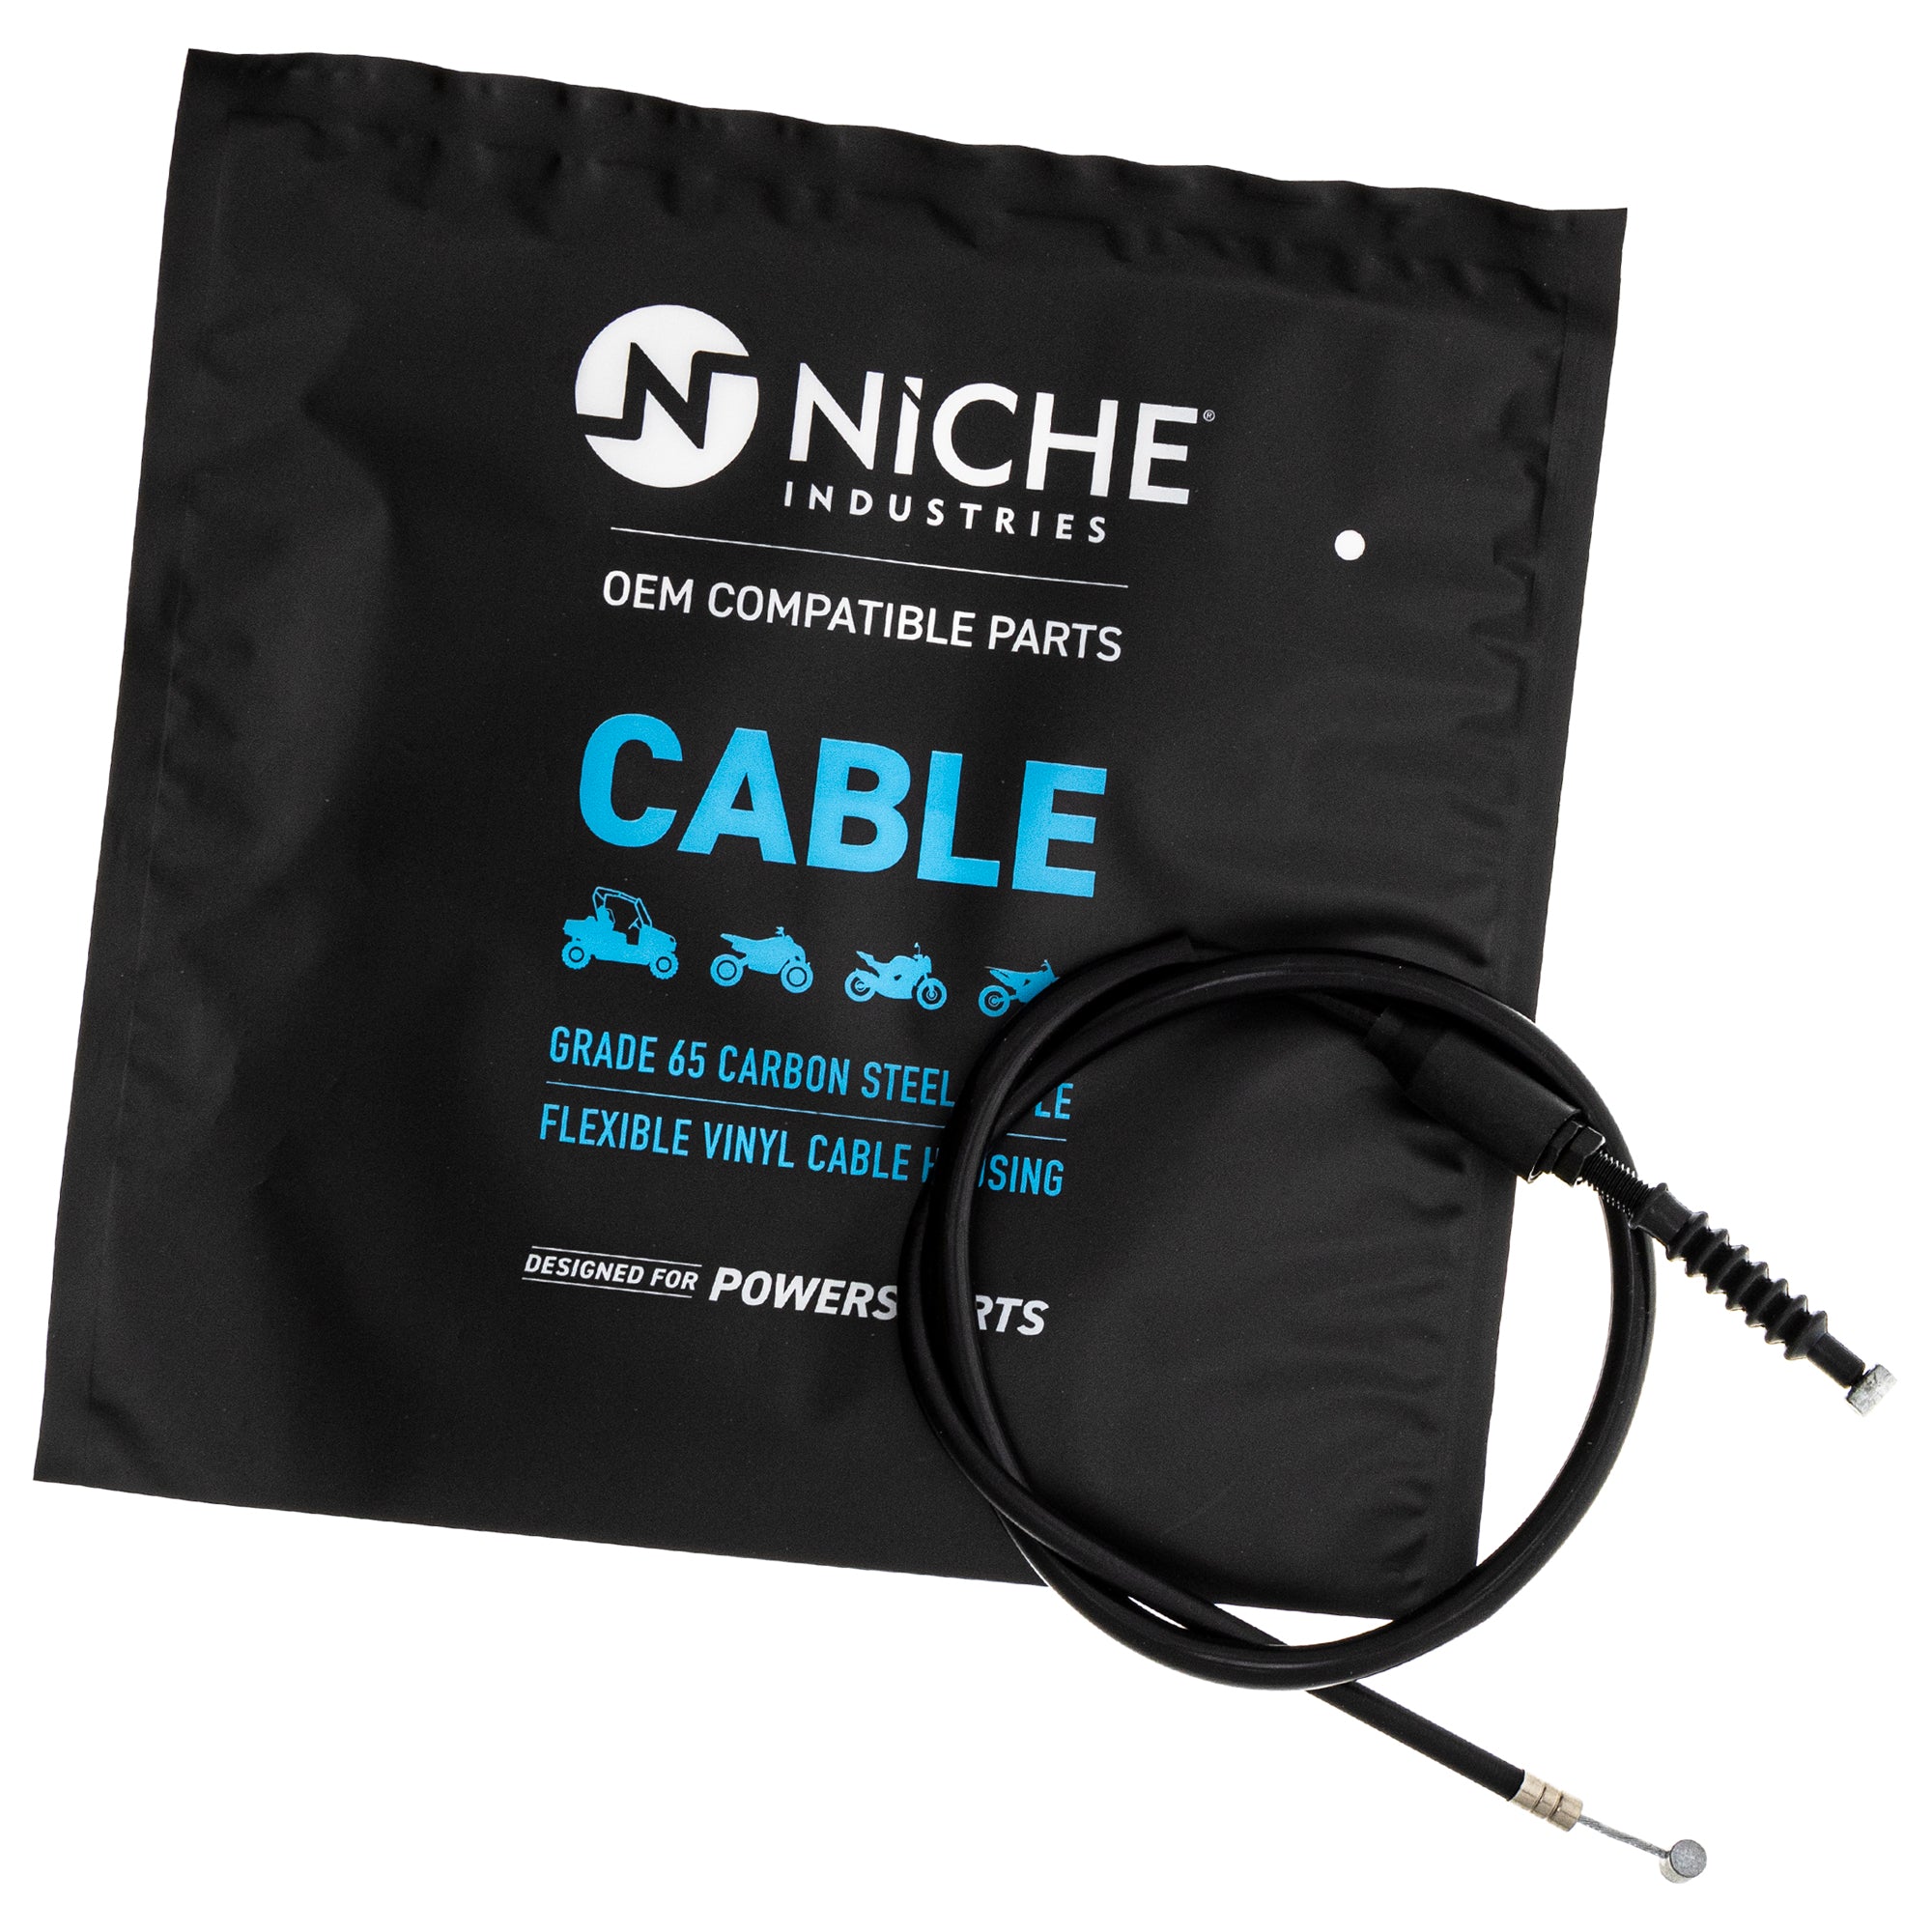 NICHE 519-CCB2773L Clutch Cable for zOTHER KX80 KDX80